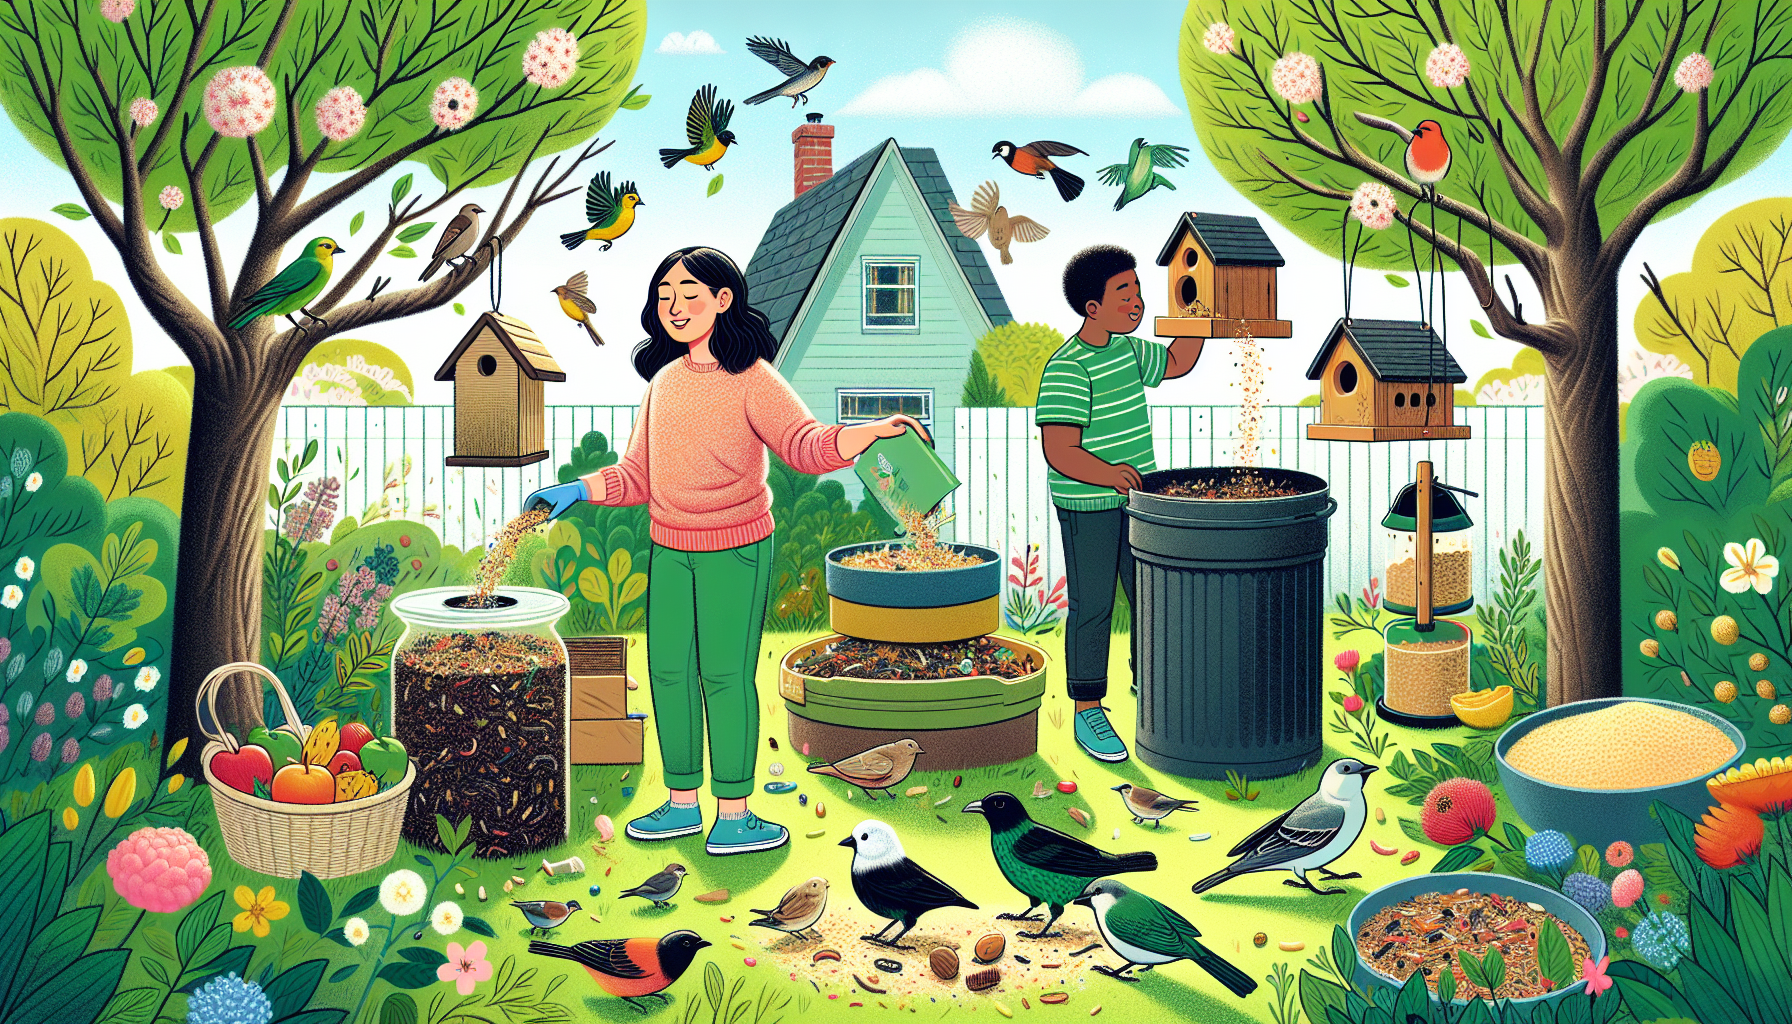 Transforming kitchen scraps into a sustainable backyard haven for birds